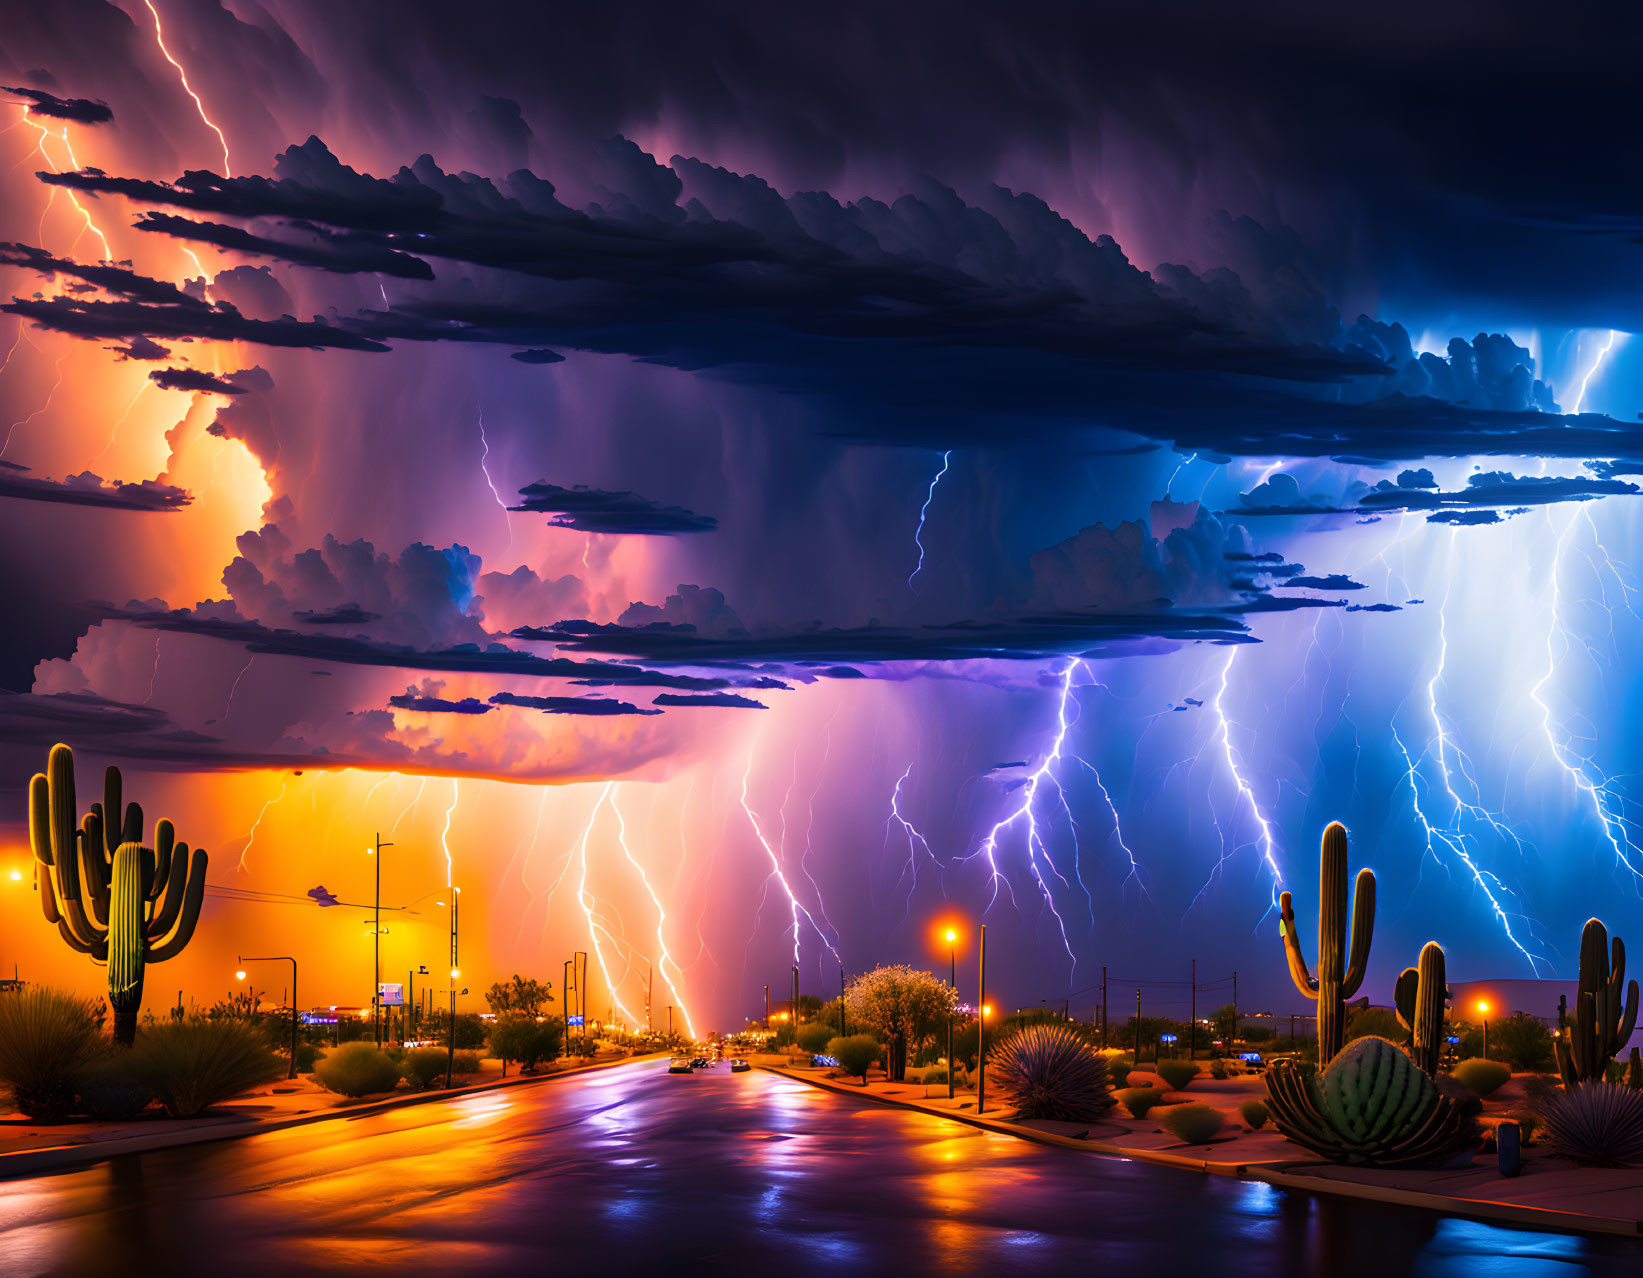 Vivid lightning storm over desert road with cacti under dramatic sky